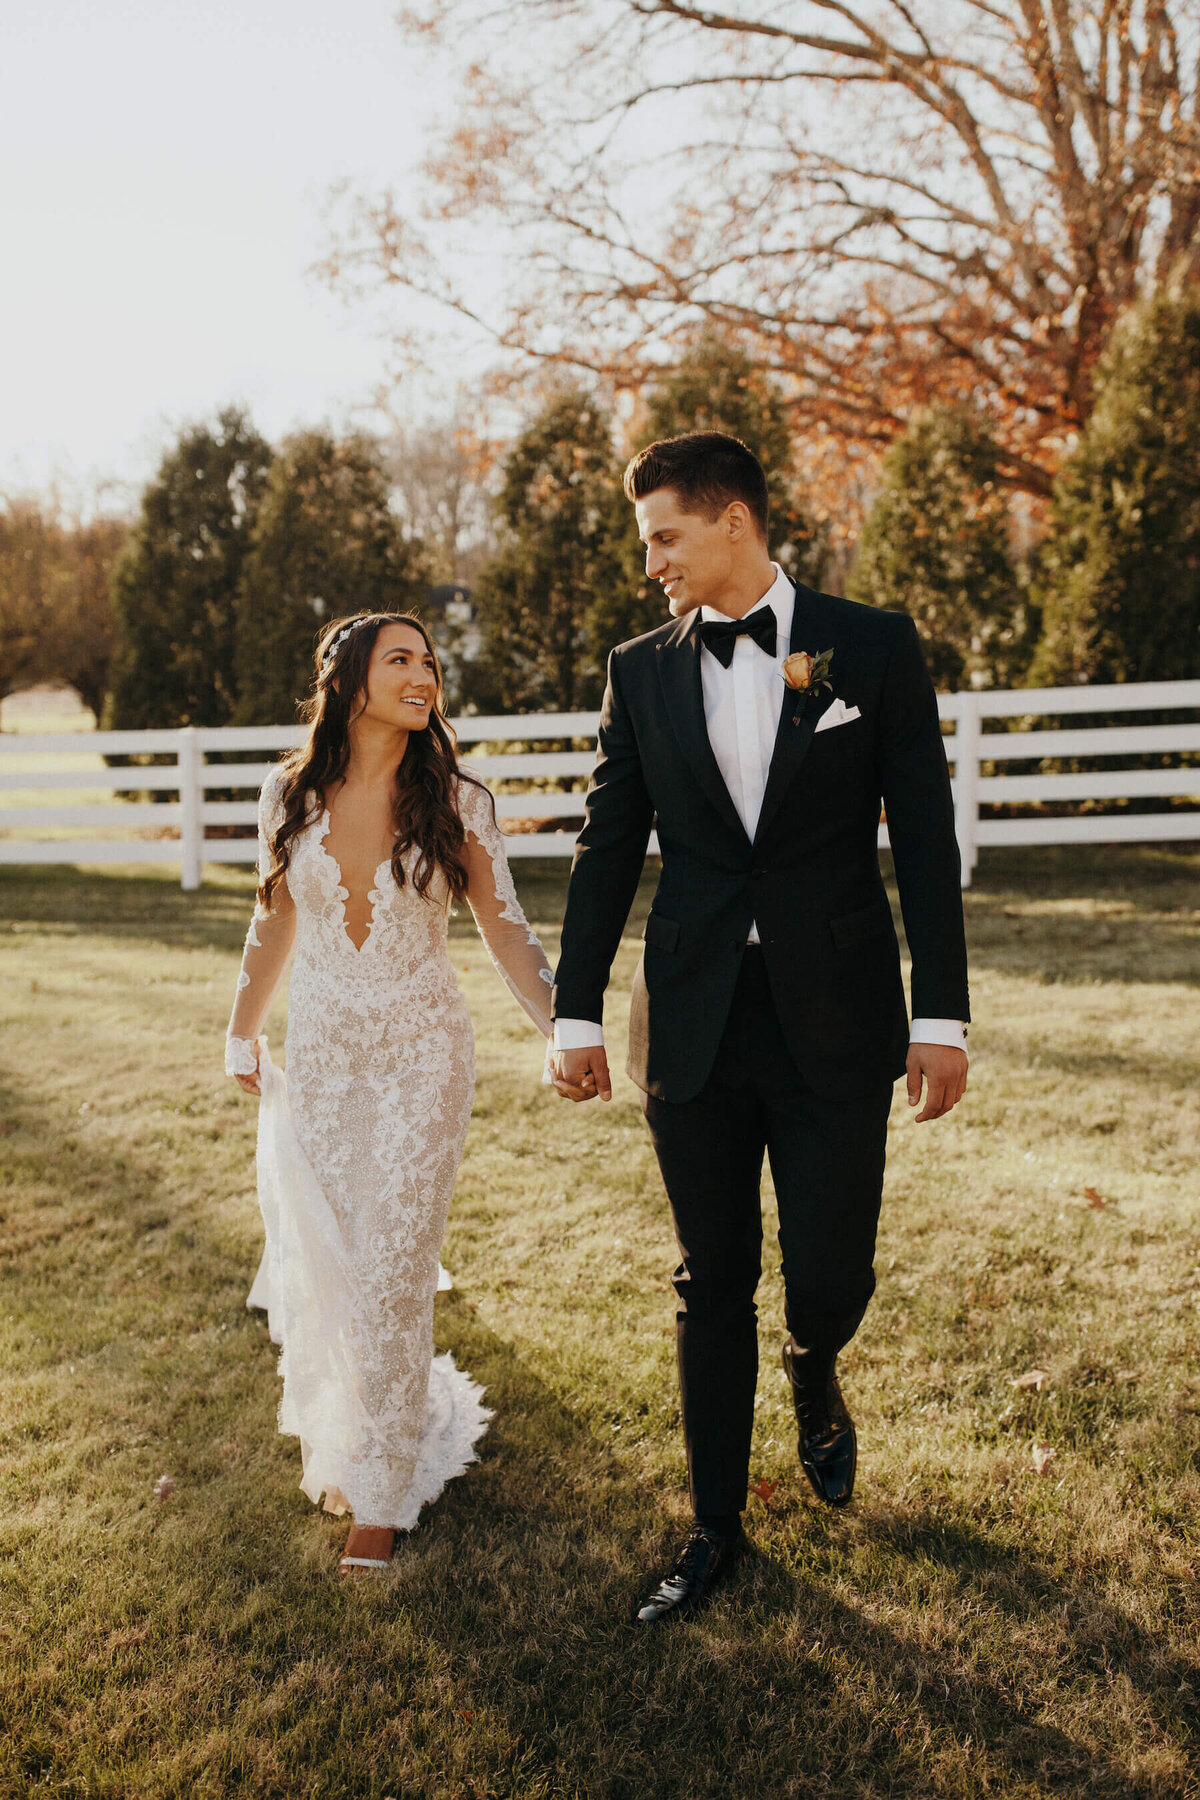 Mady Seager in custom lace wedding dress